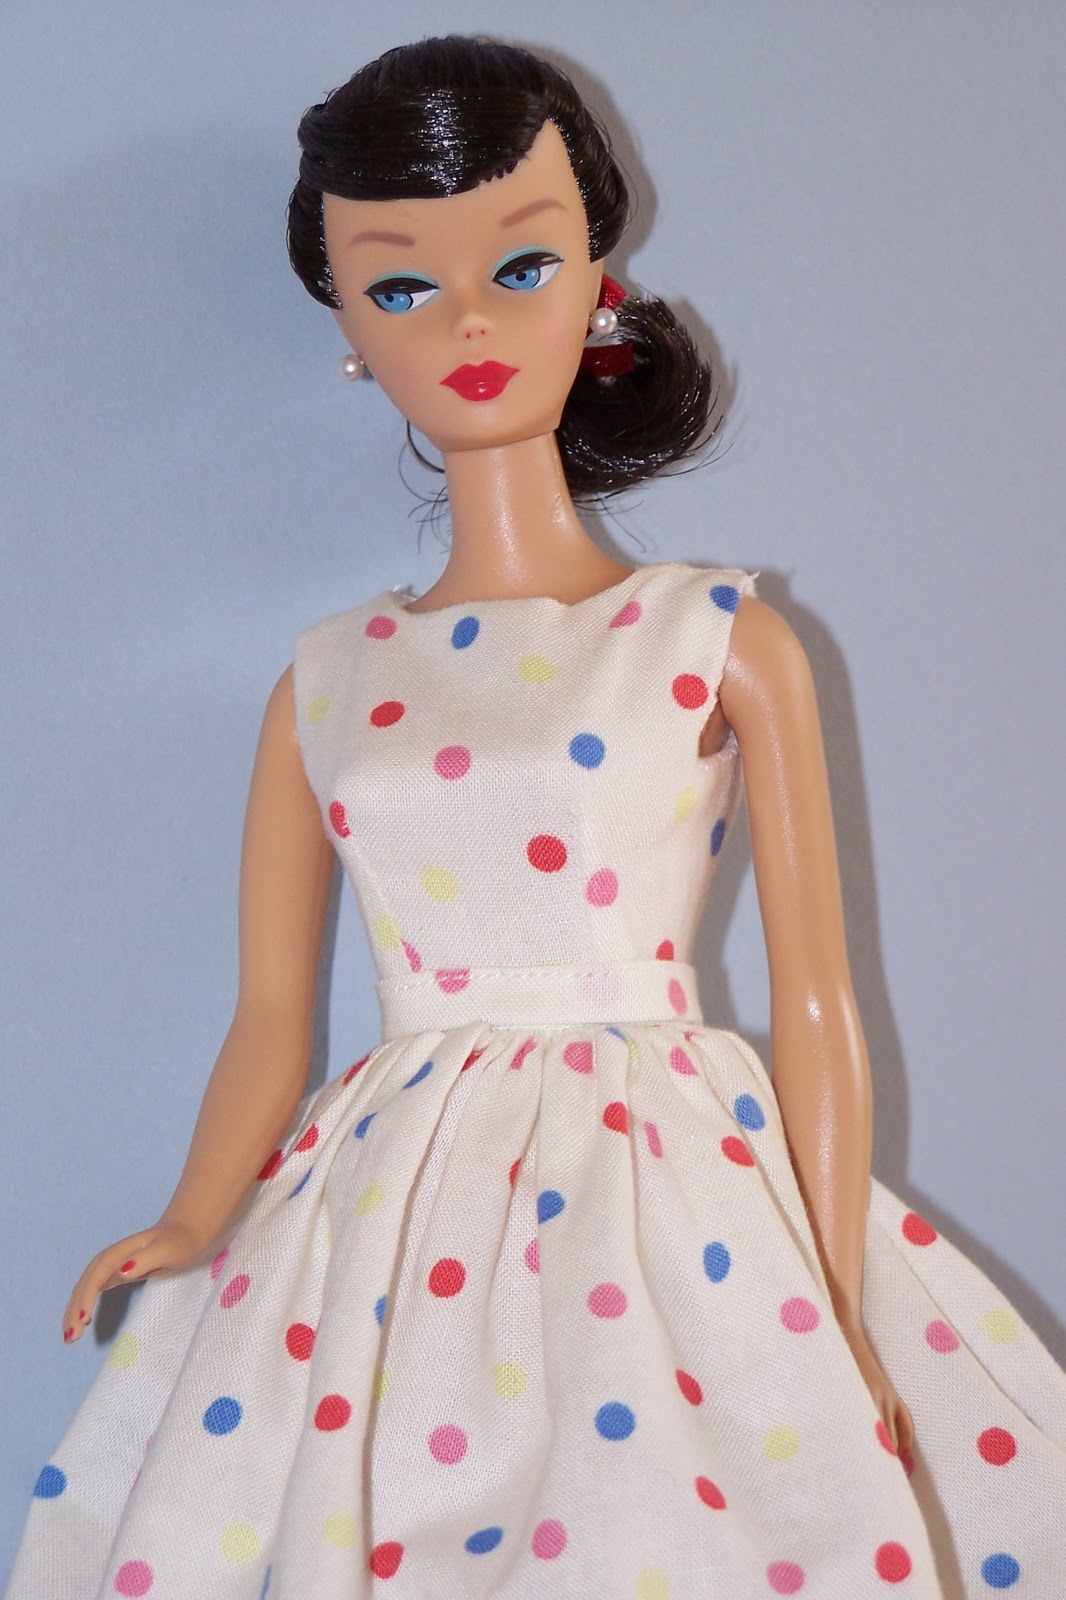 Lizzie's Arty Crafty 'n Dolls: Dolls! Reproduction Ponytail Barbie Gets